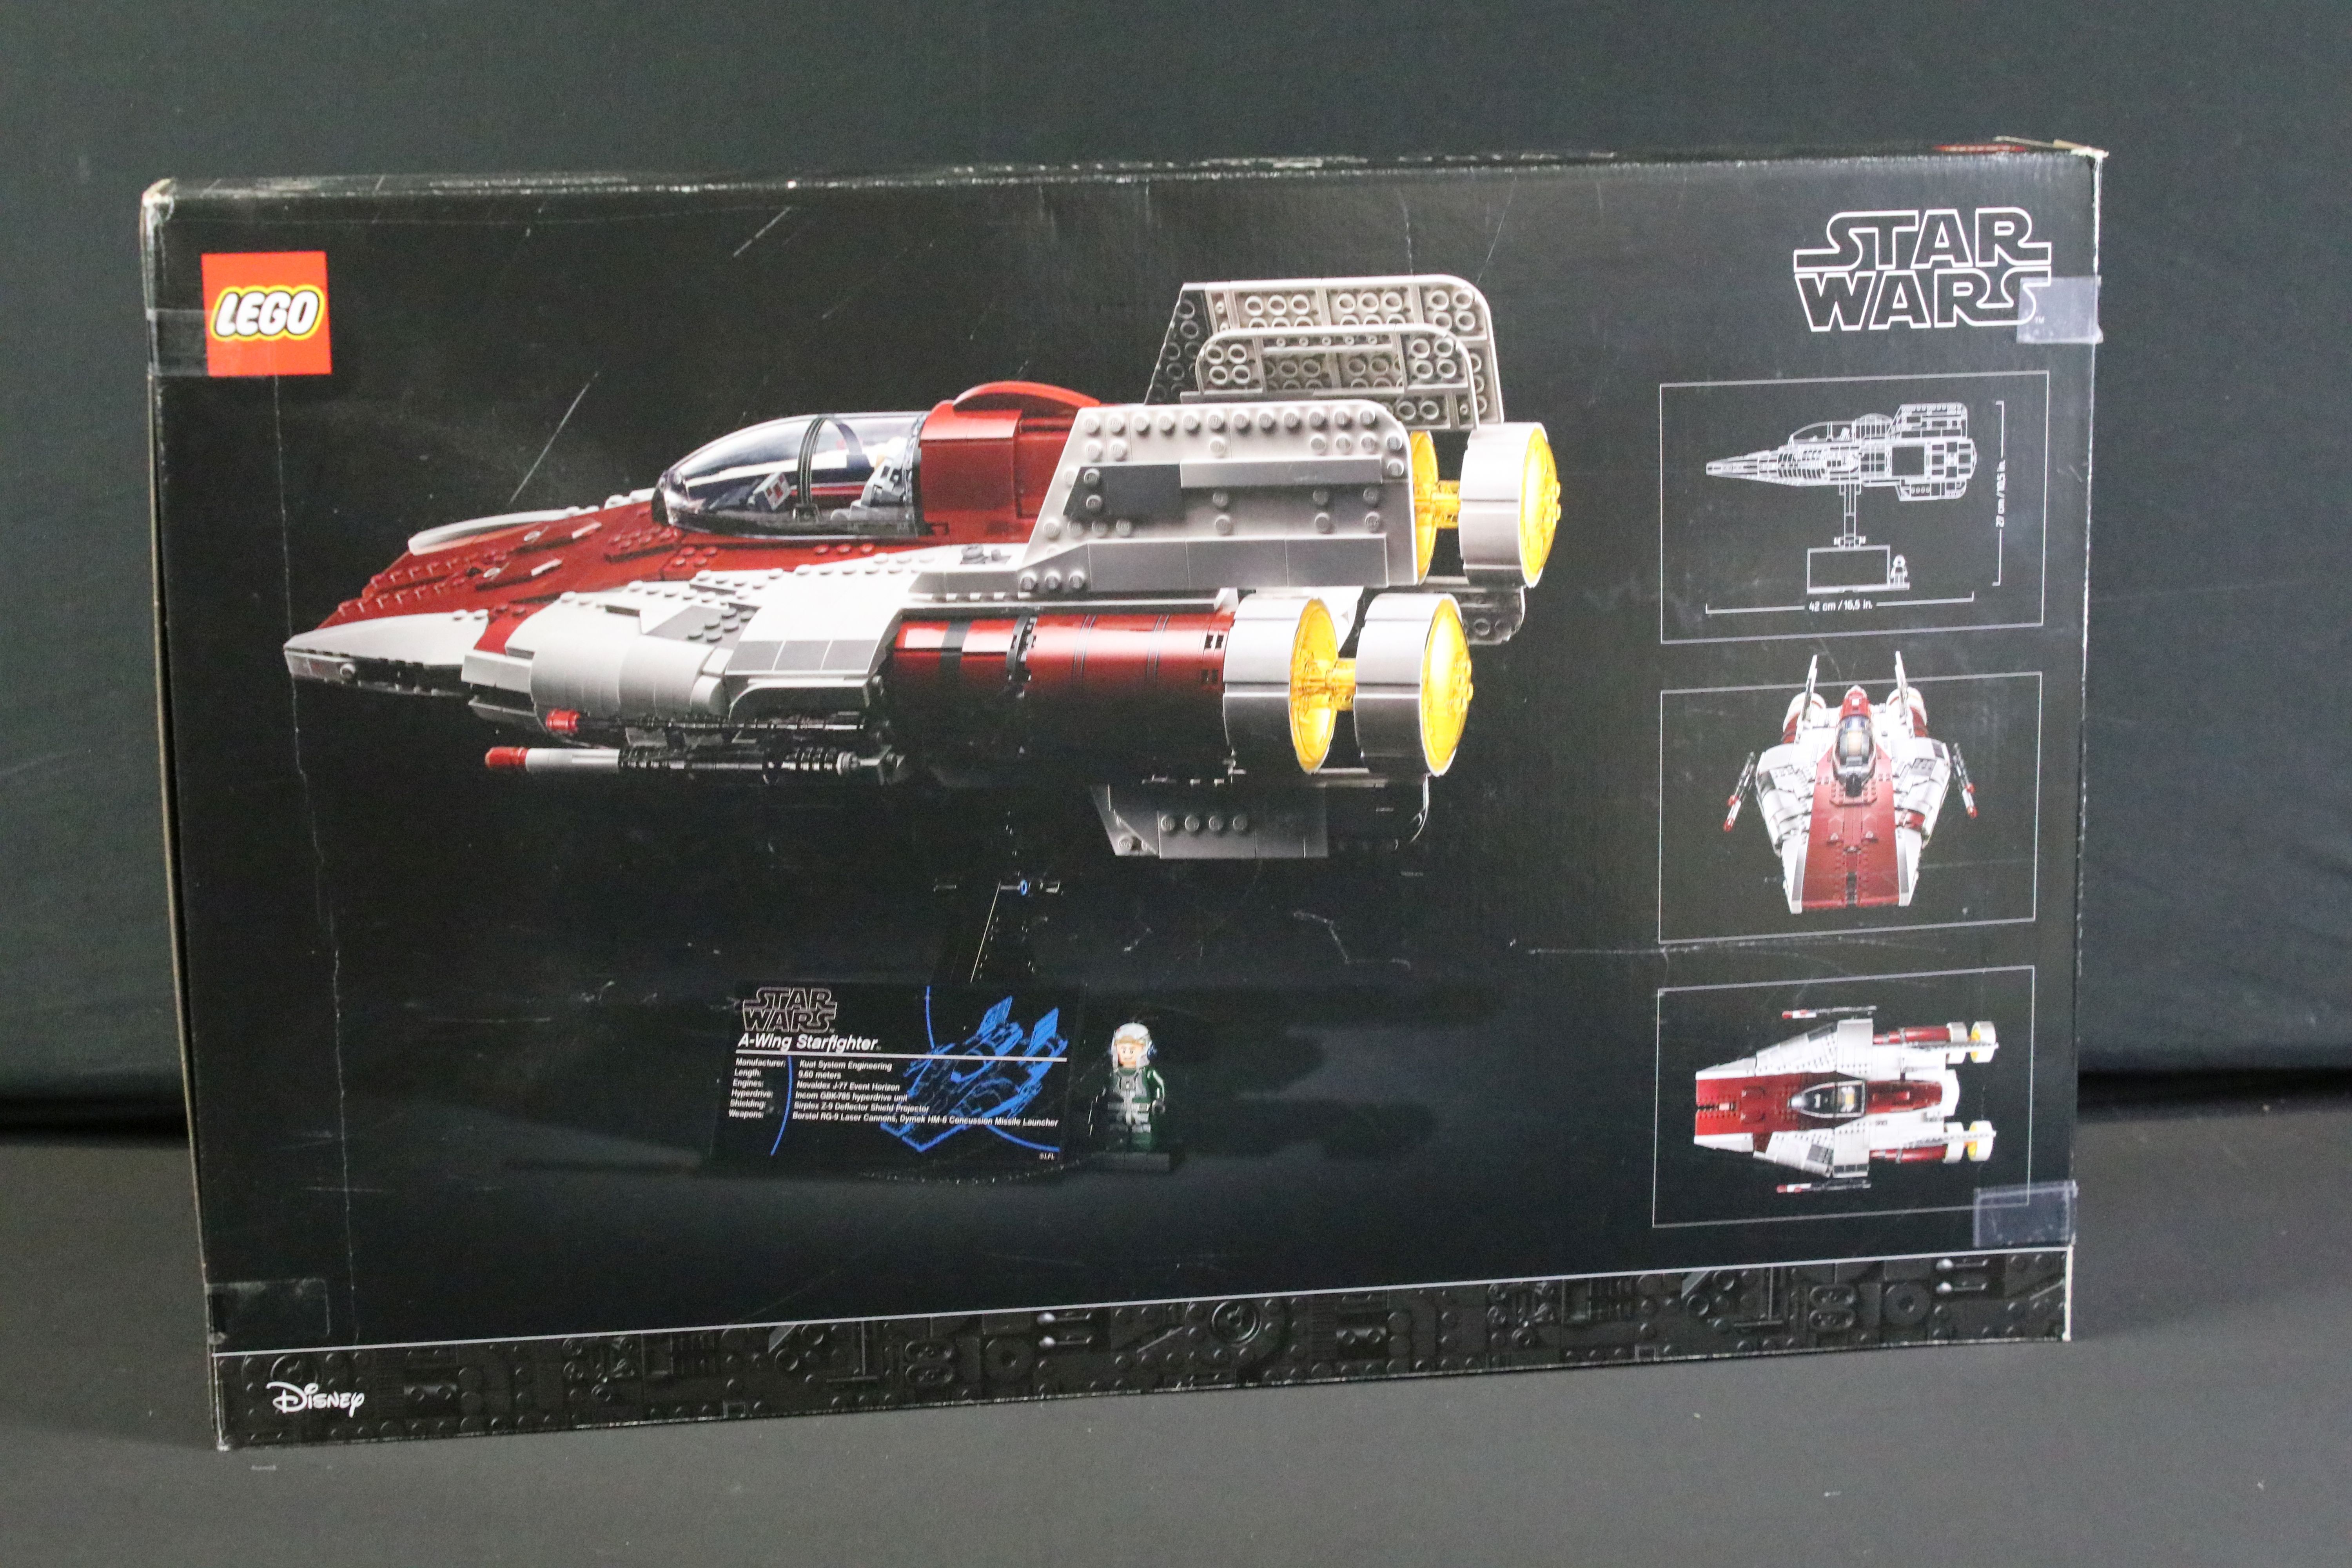 Lego - Boxed 75275 Star Wars Ultimate Collectors Series A-Wing Starfighter set, contents sealed - Image 3 of 3